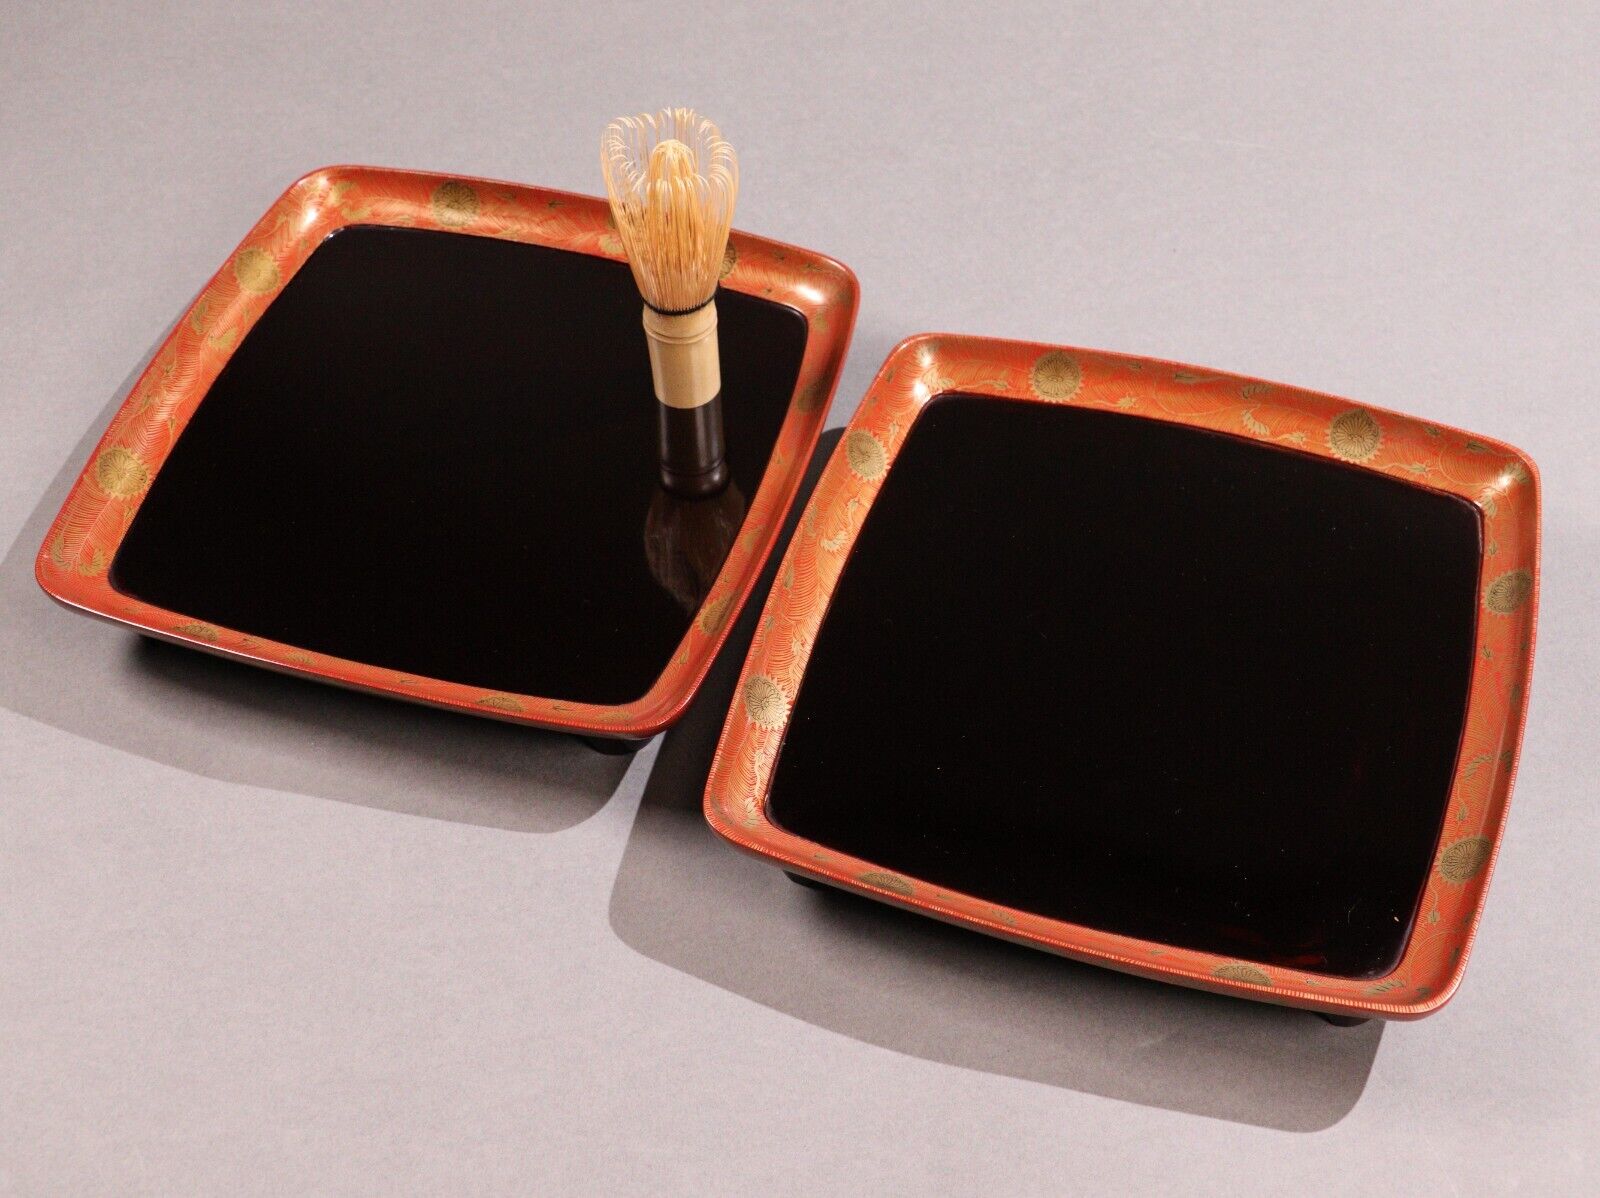 Vintage Japanese Lacquer Ware Wooden Pair Tea Trays 9.6inch Makie Tea Ceremony